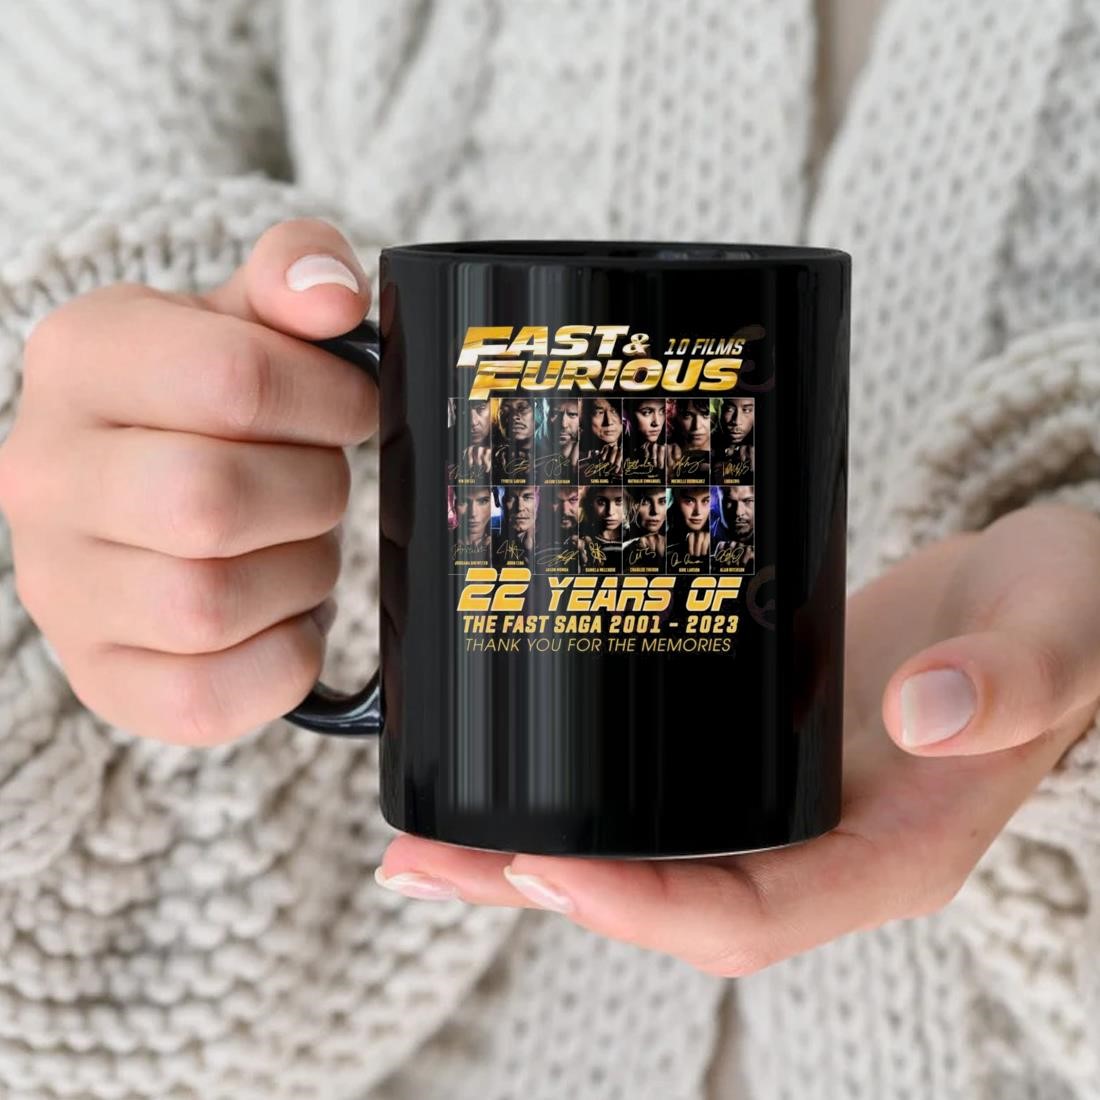 Fast & Furious 10 Films 22 Years Of The Fast Saga 2001 – 2023 Thank You For The Memories Signatures 2023 Mug